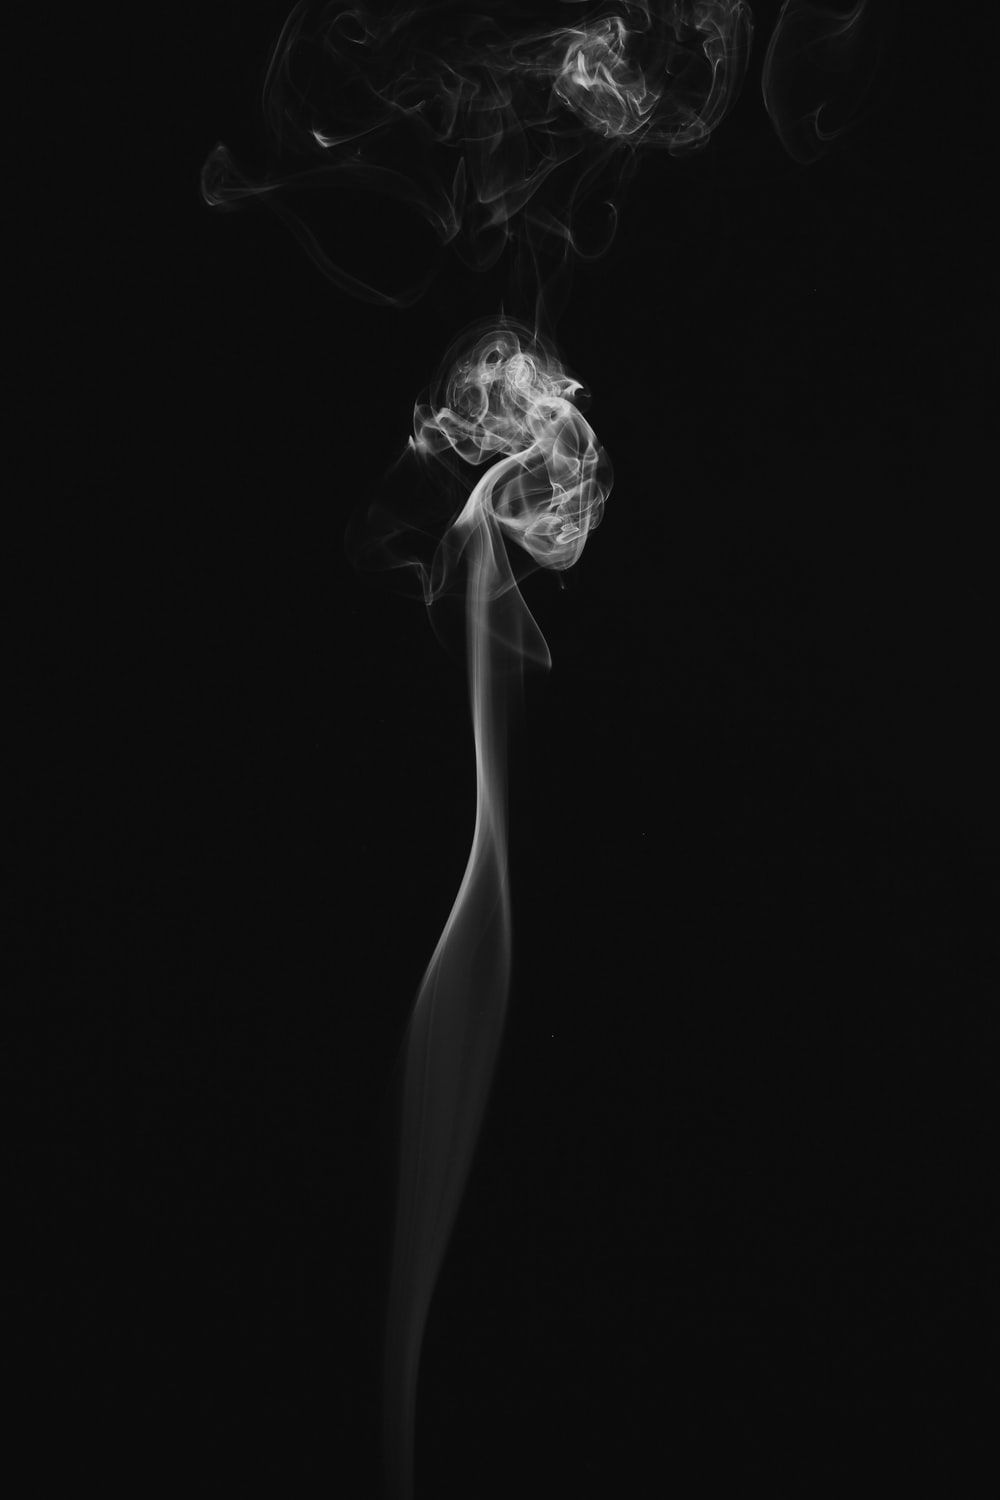 A black and white photo of smoke rising from a candle - Smoke